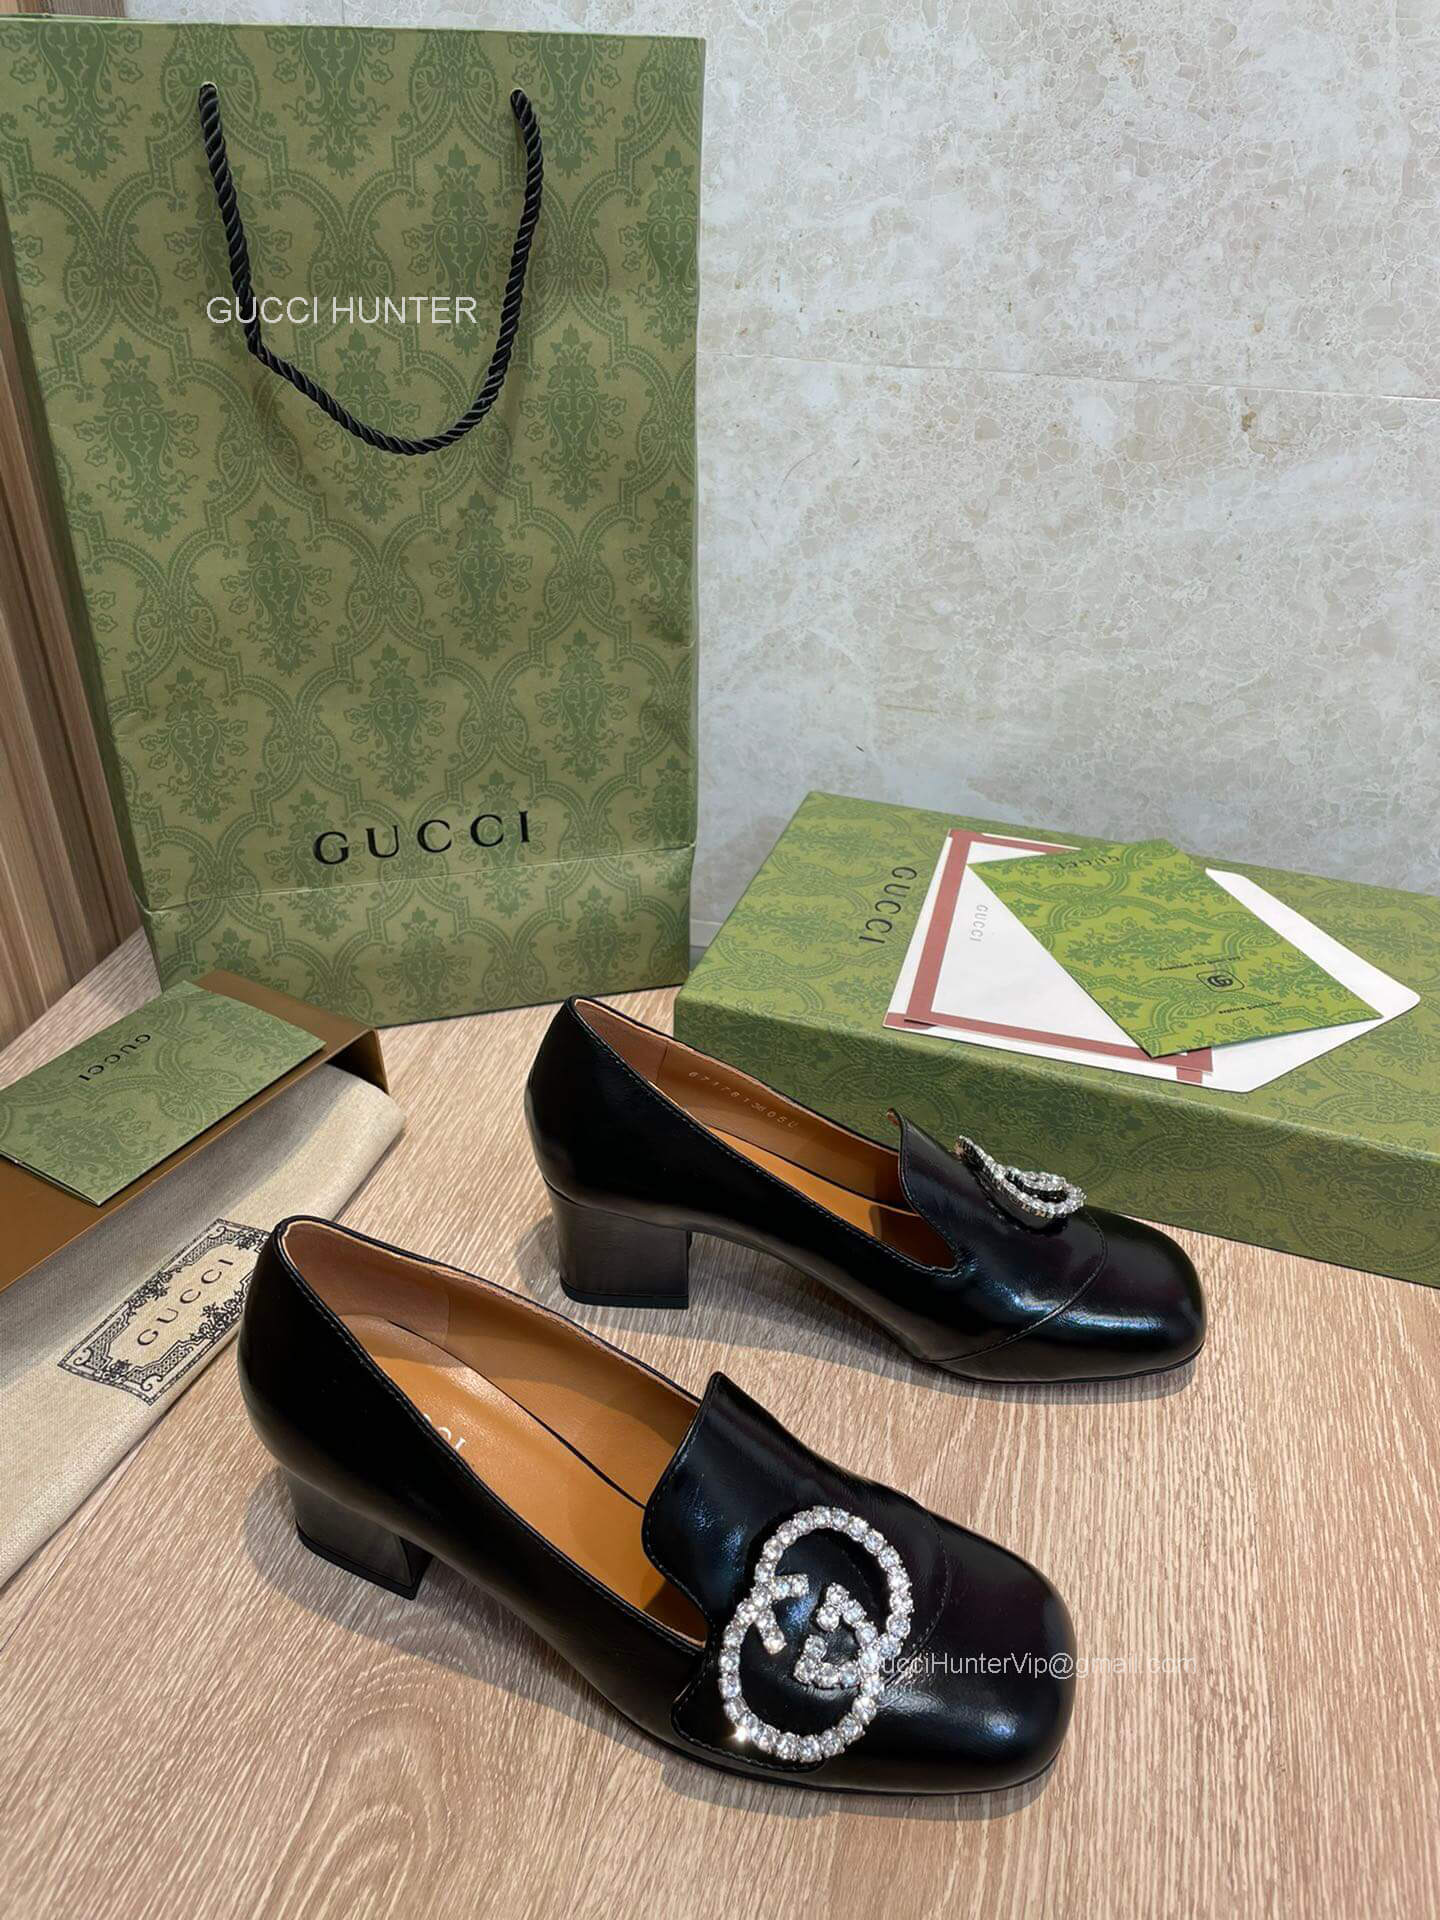 Gucci 2022 Crystals Interloking G Heeled Loafers in Black Shiny Calf Leather 55MM 2281573